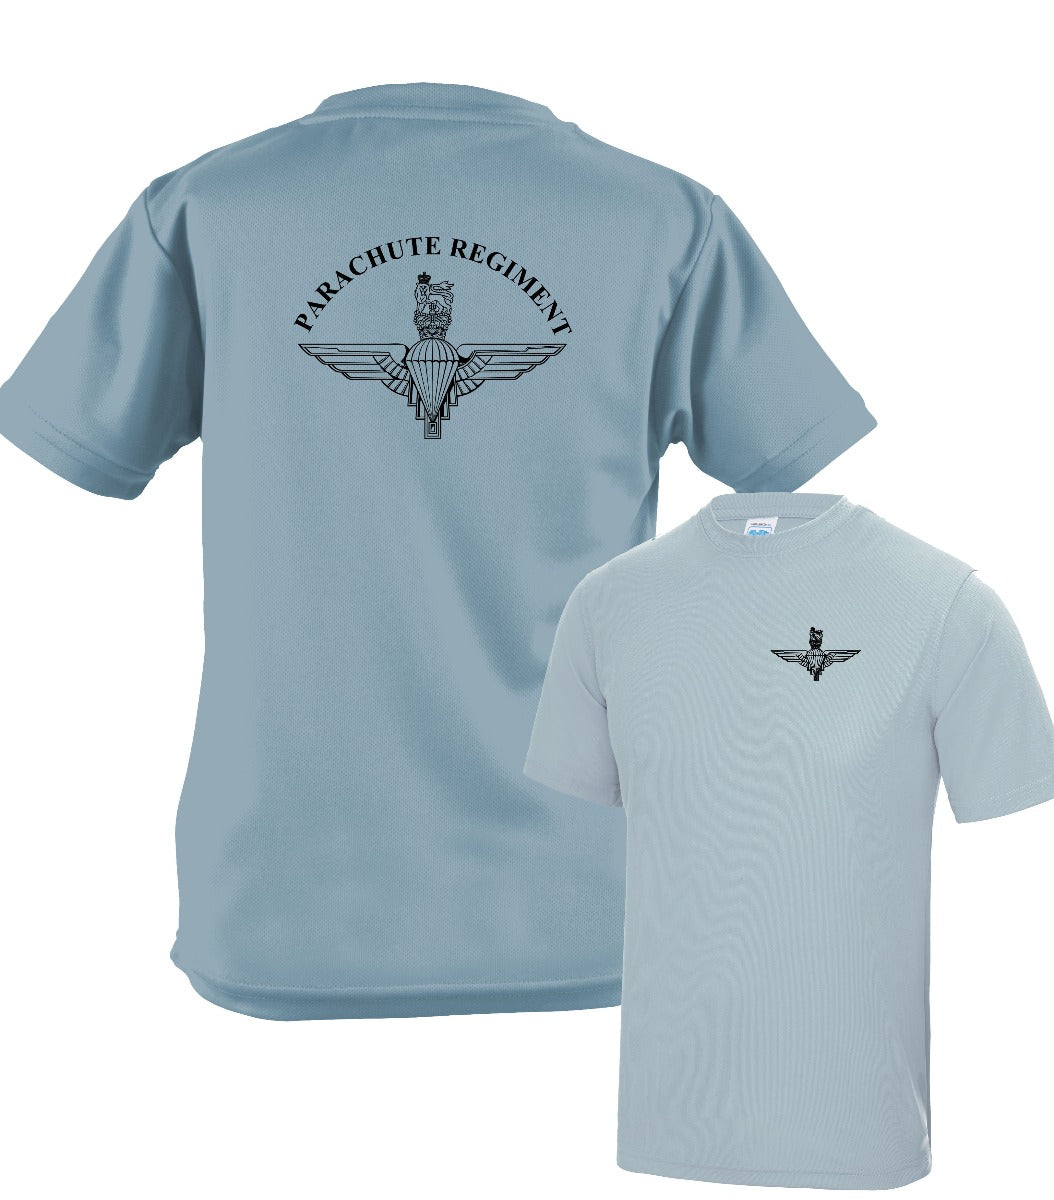 Double Printed Parachute Regiment Wicking T-Shirt